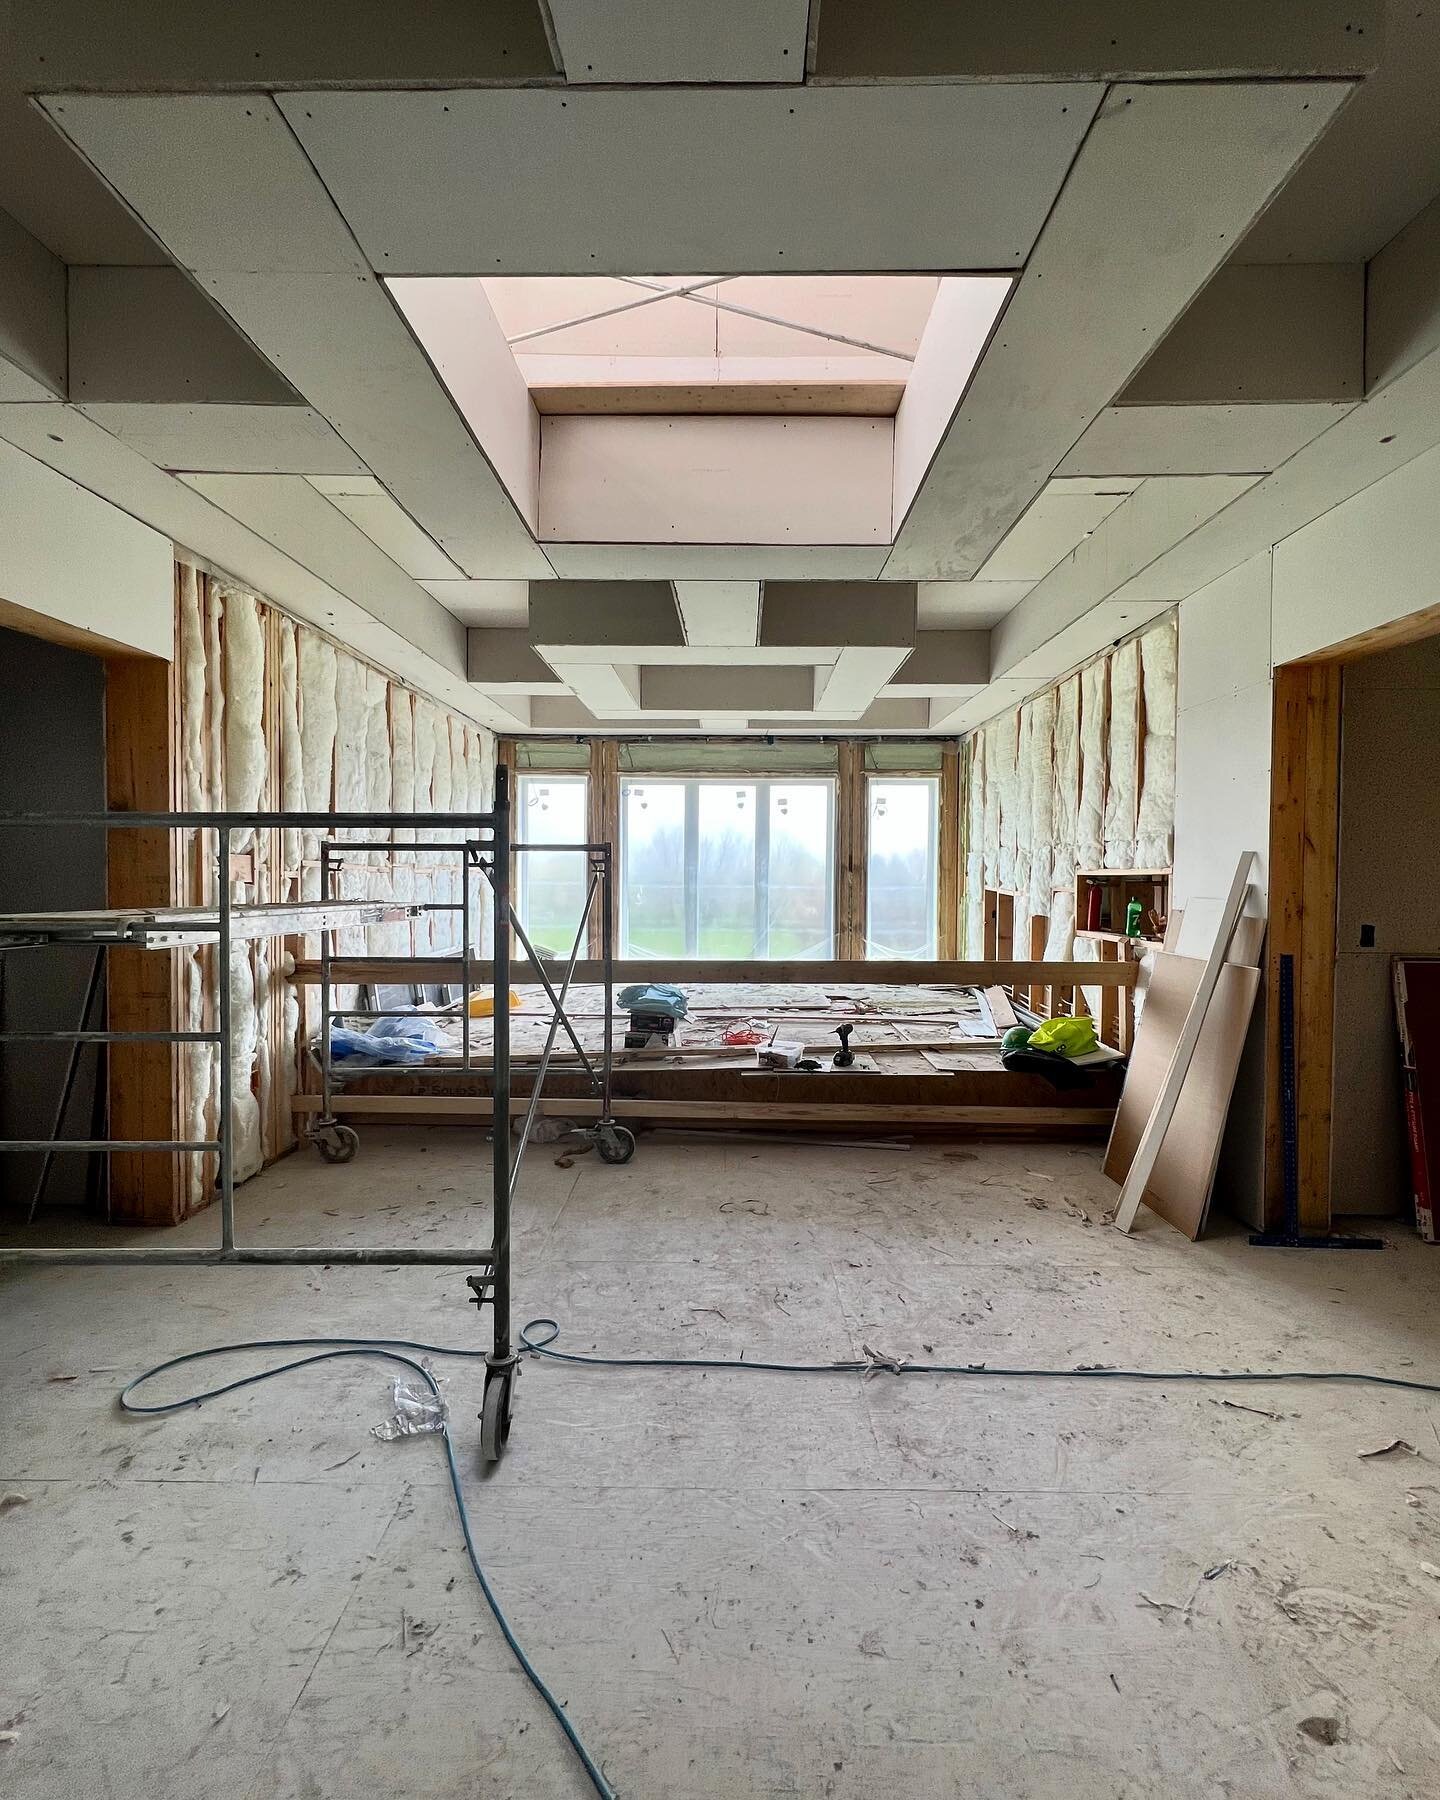 Progress at our #Brampton Design-Build Project! Want to see more?
----------------------------------⁠⁠⠀⠀ ⠀
Interested in building your dream home? Contact us! ⠀
☎️: (416) 816-4313 ⠀
✉️ info@prestigecustomhome.com ⠀
----------------------------------⁠